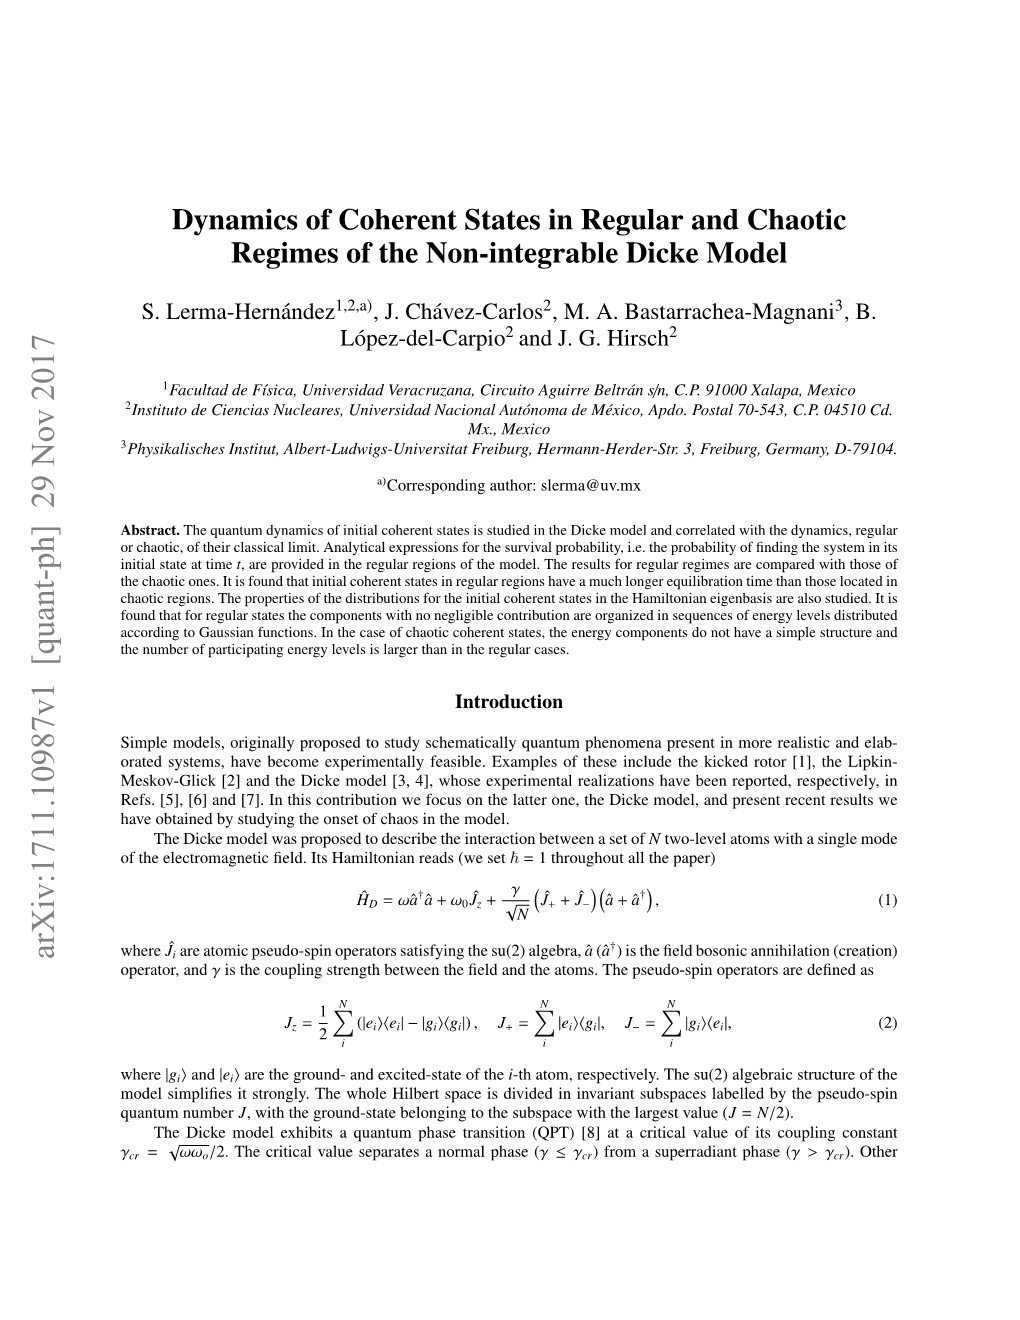 Dynamics of Coherent States in Regular and Chaotic Regimes of the Non-Integrable Dicke Model